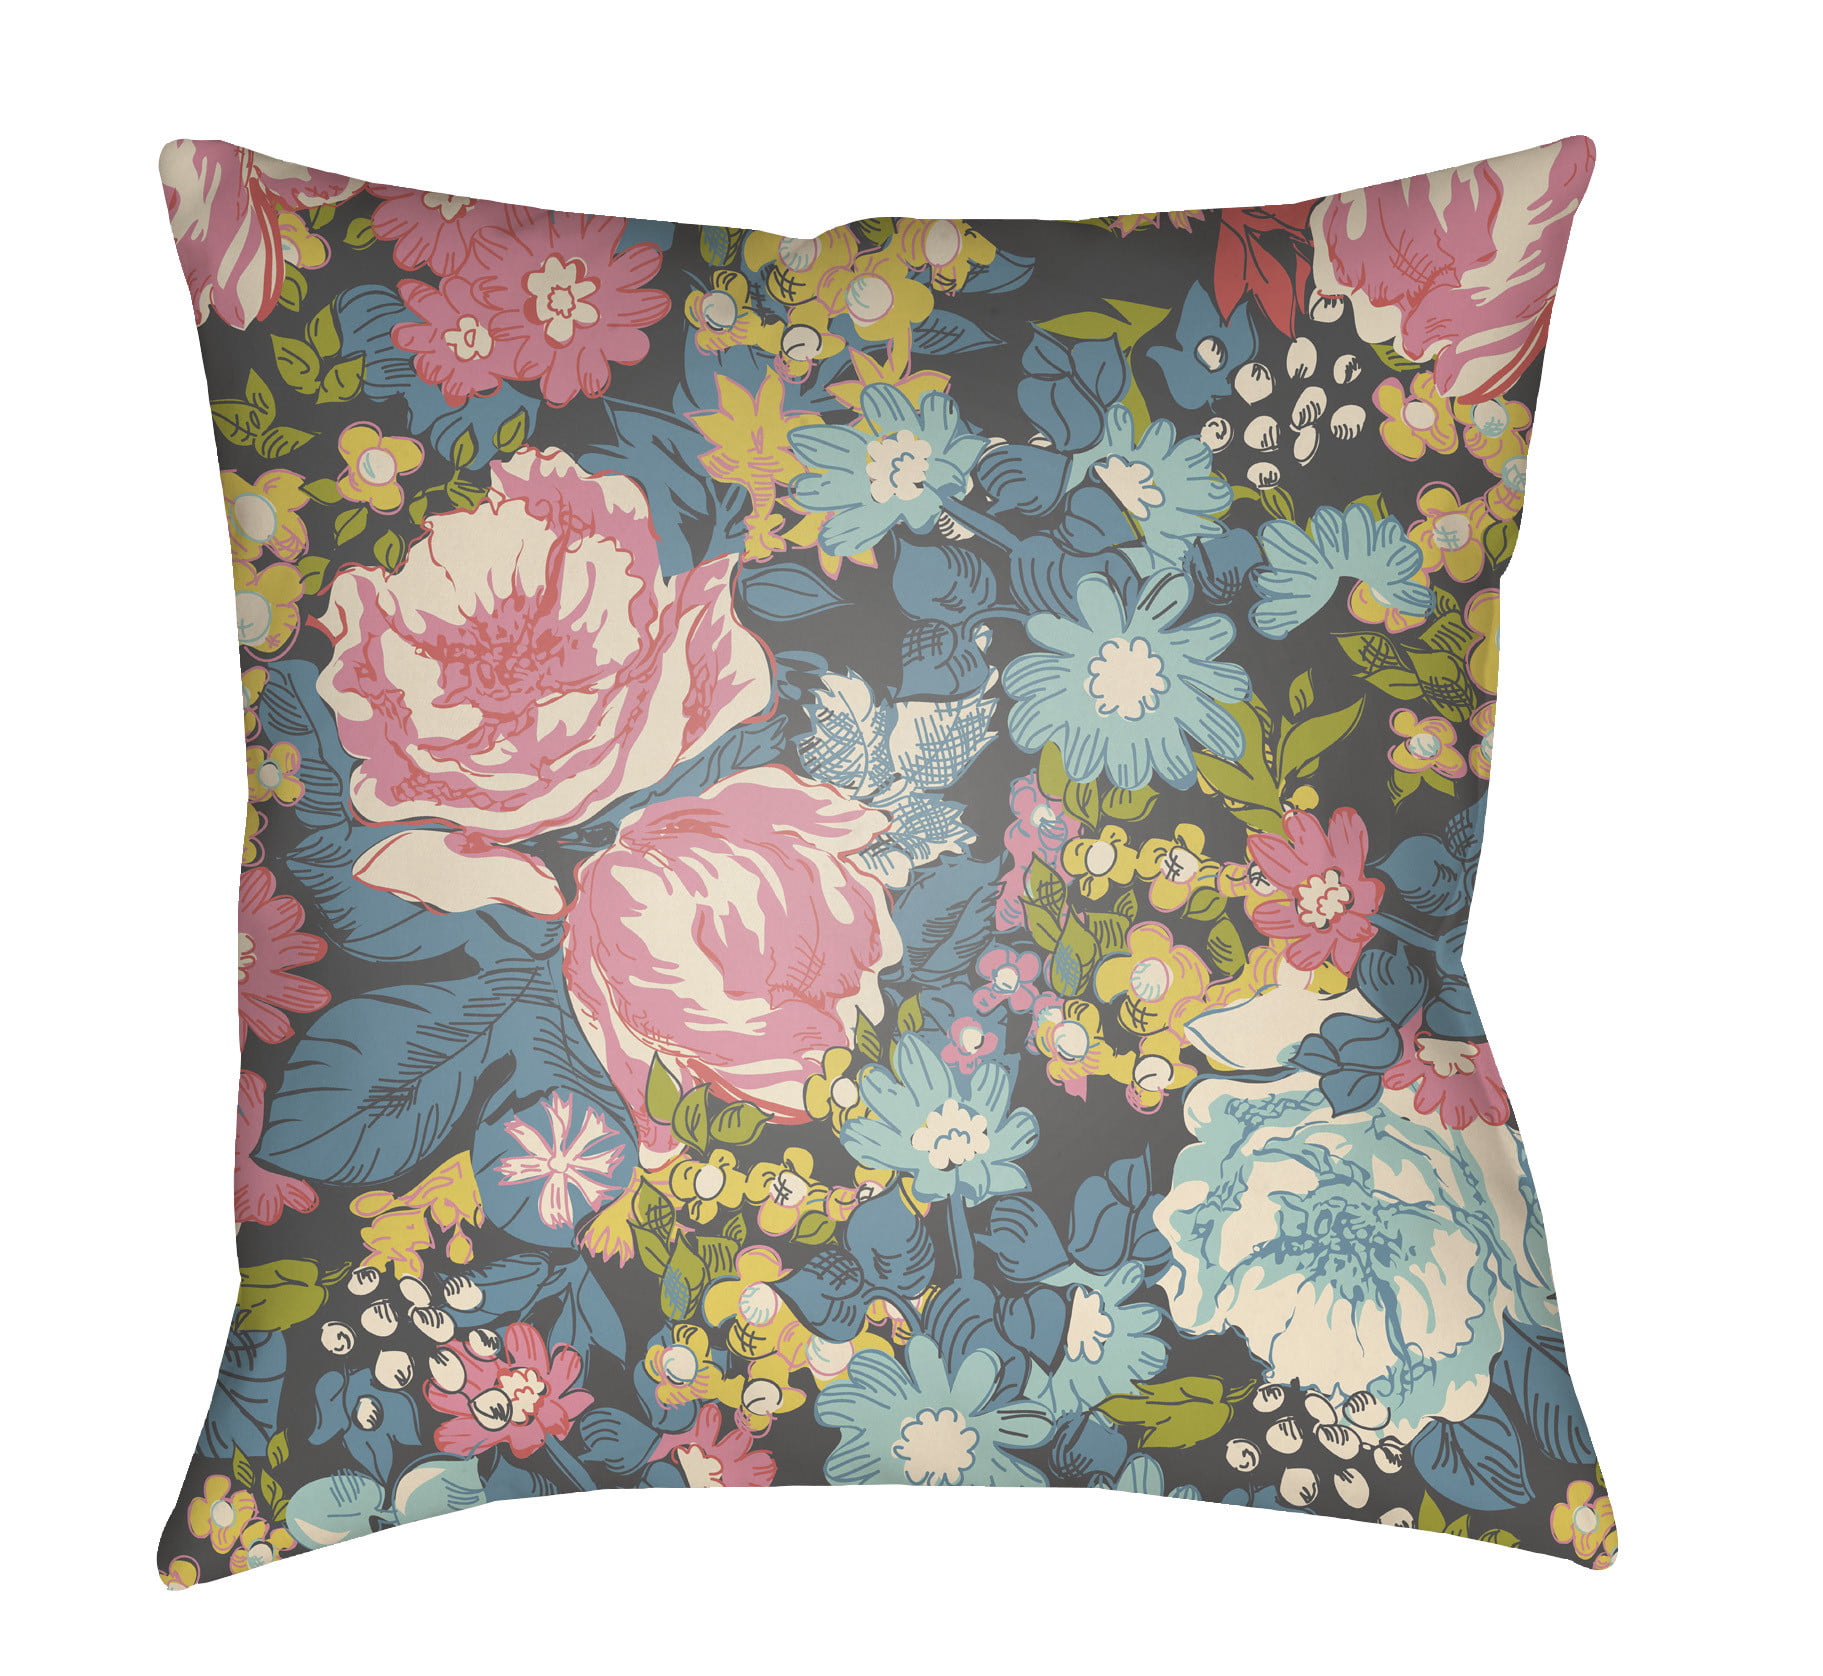 Picture of Artistic Weavers LOTA1100-1616 Lolita Square Pillow, Carnation Pink & Denim Blue - 16 x 16 in.